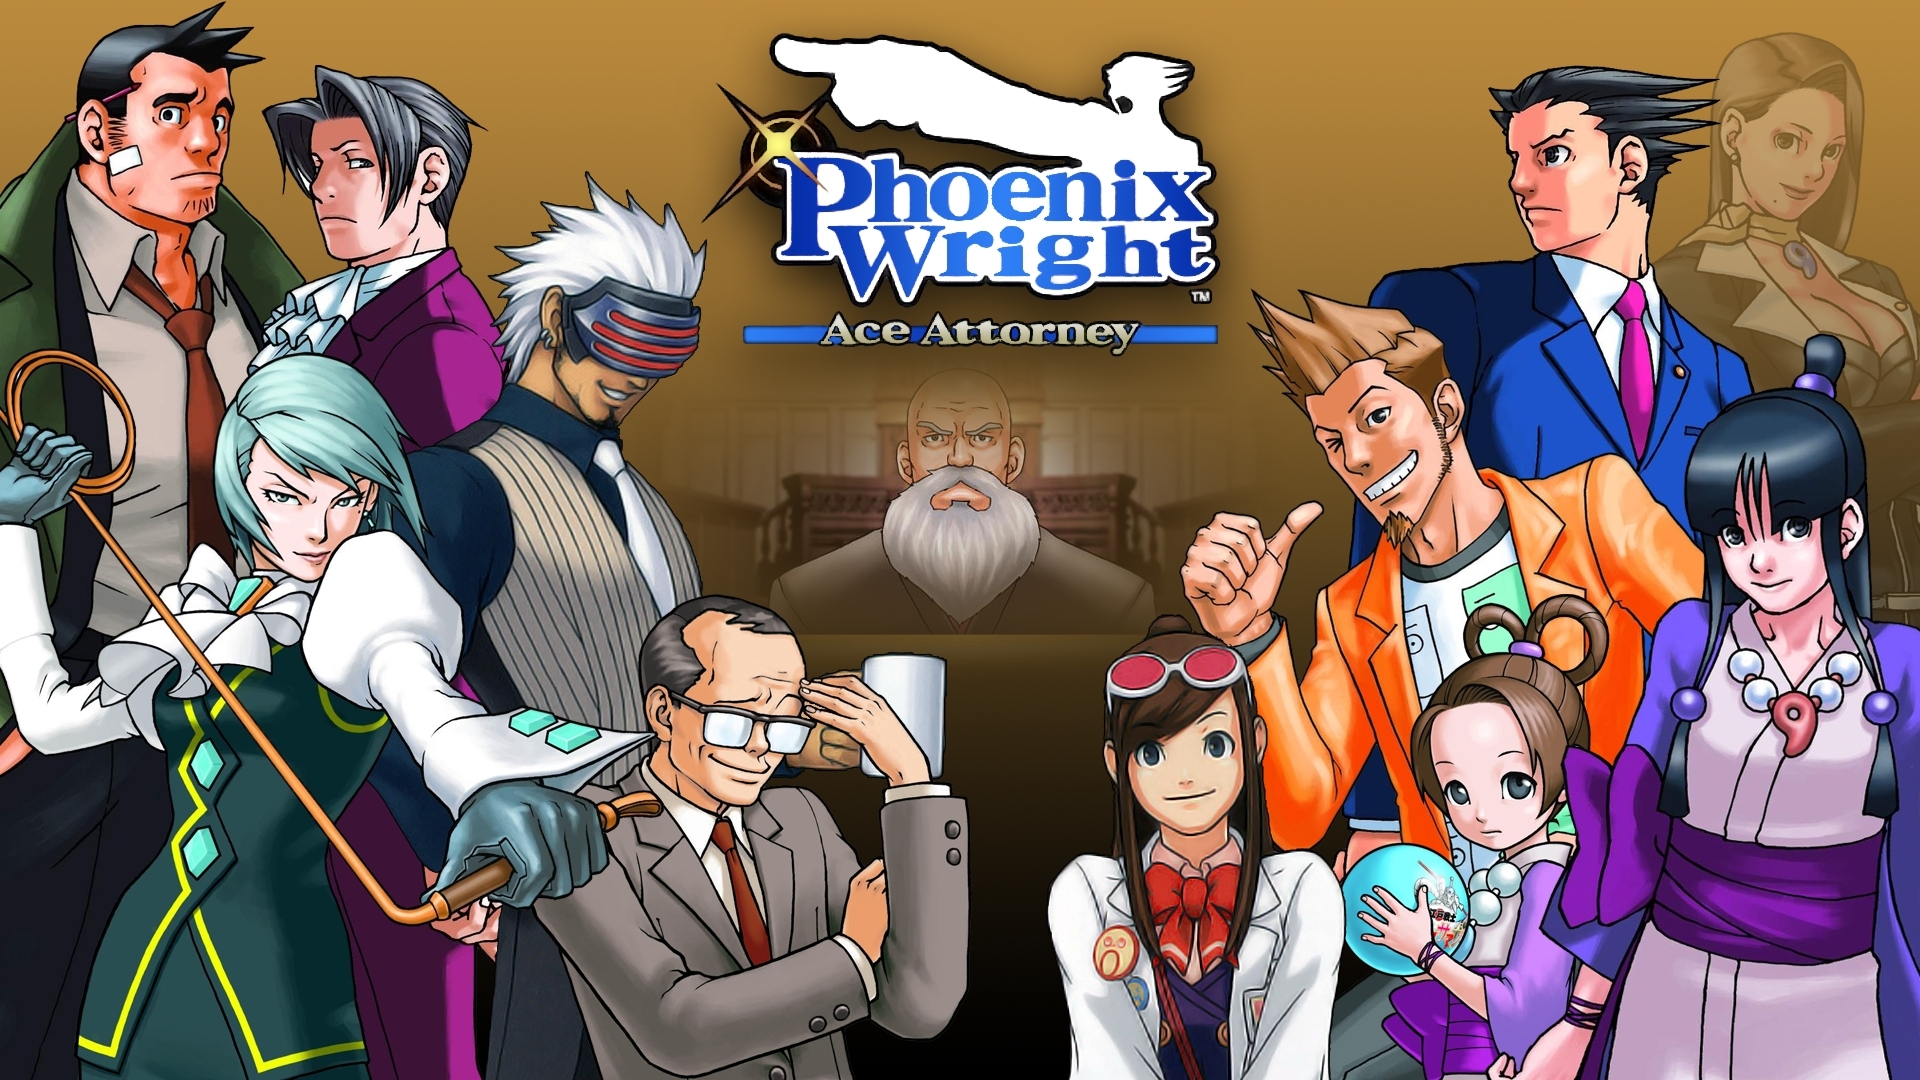 Phoenix Wright: Ace Attorney Wallpapers